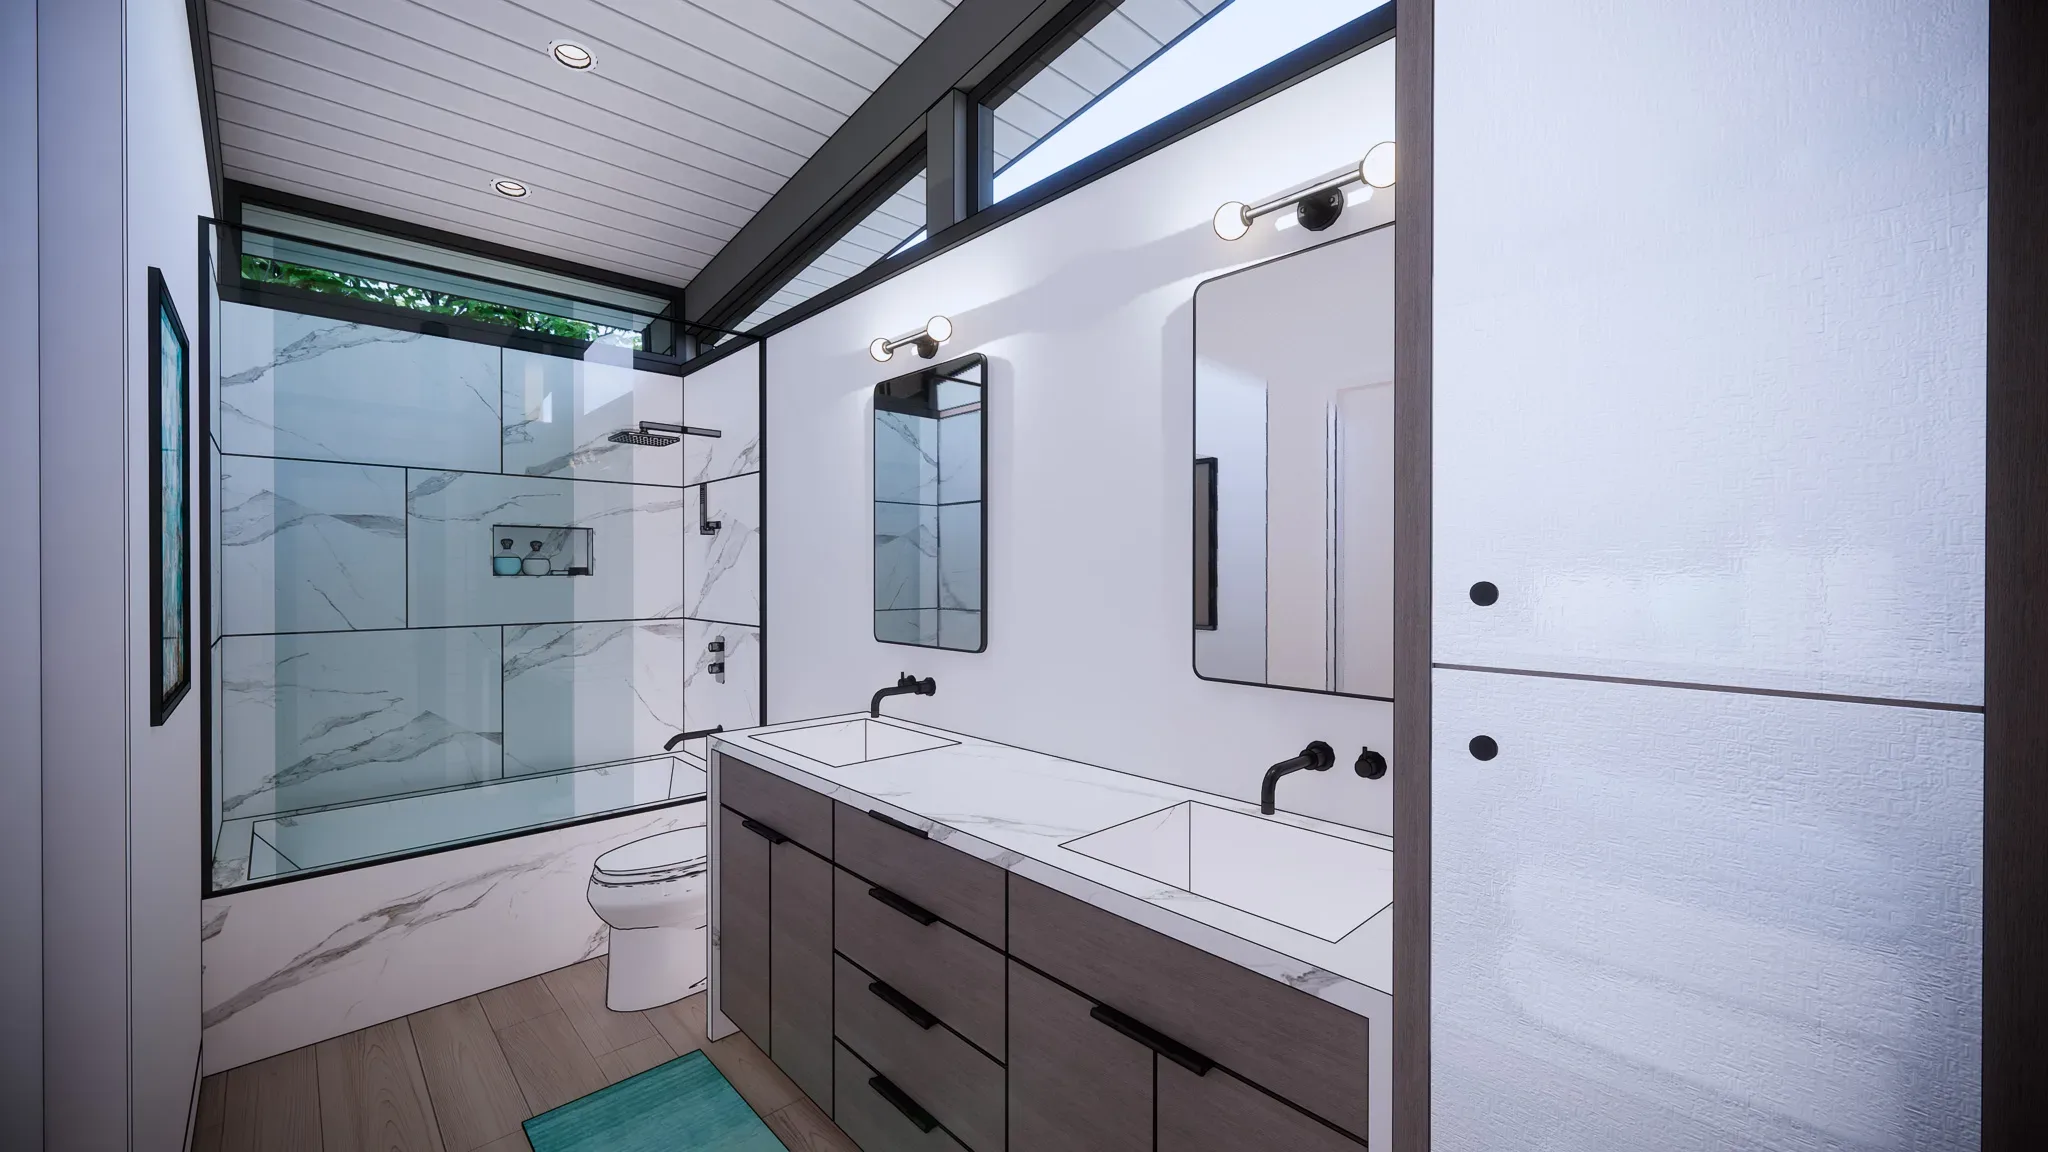 A bathroom with a glass shower and sink.